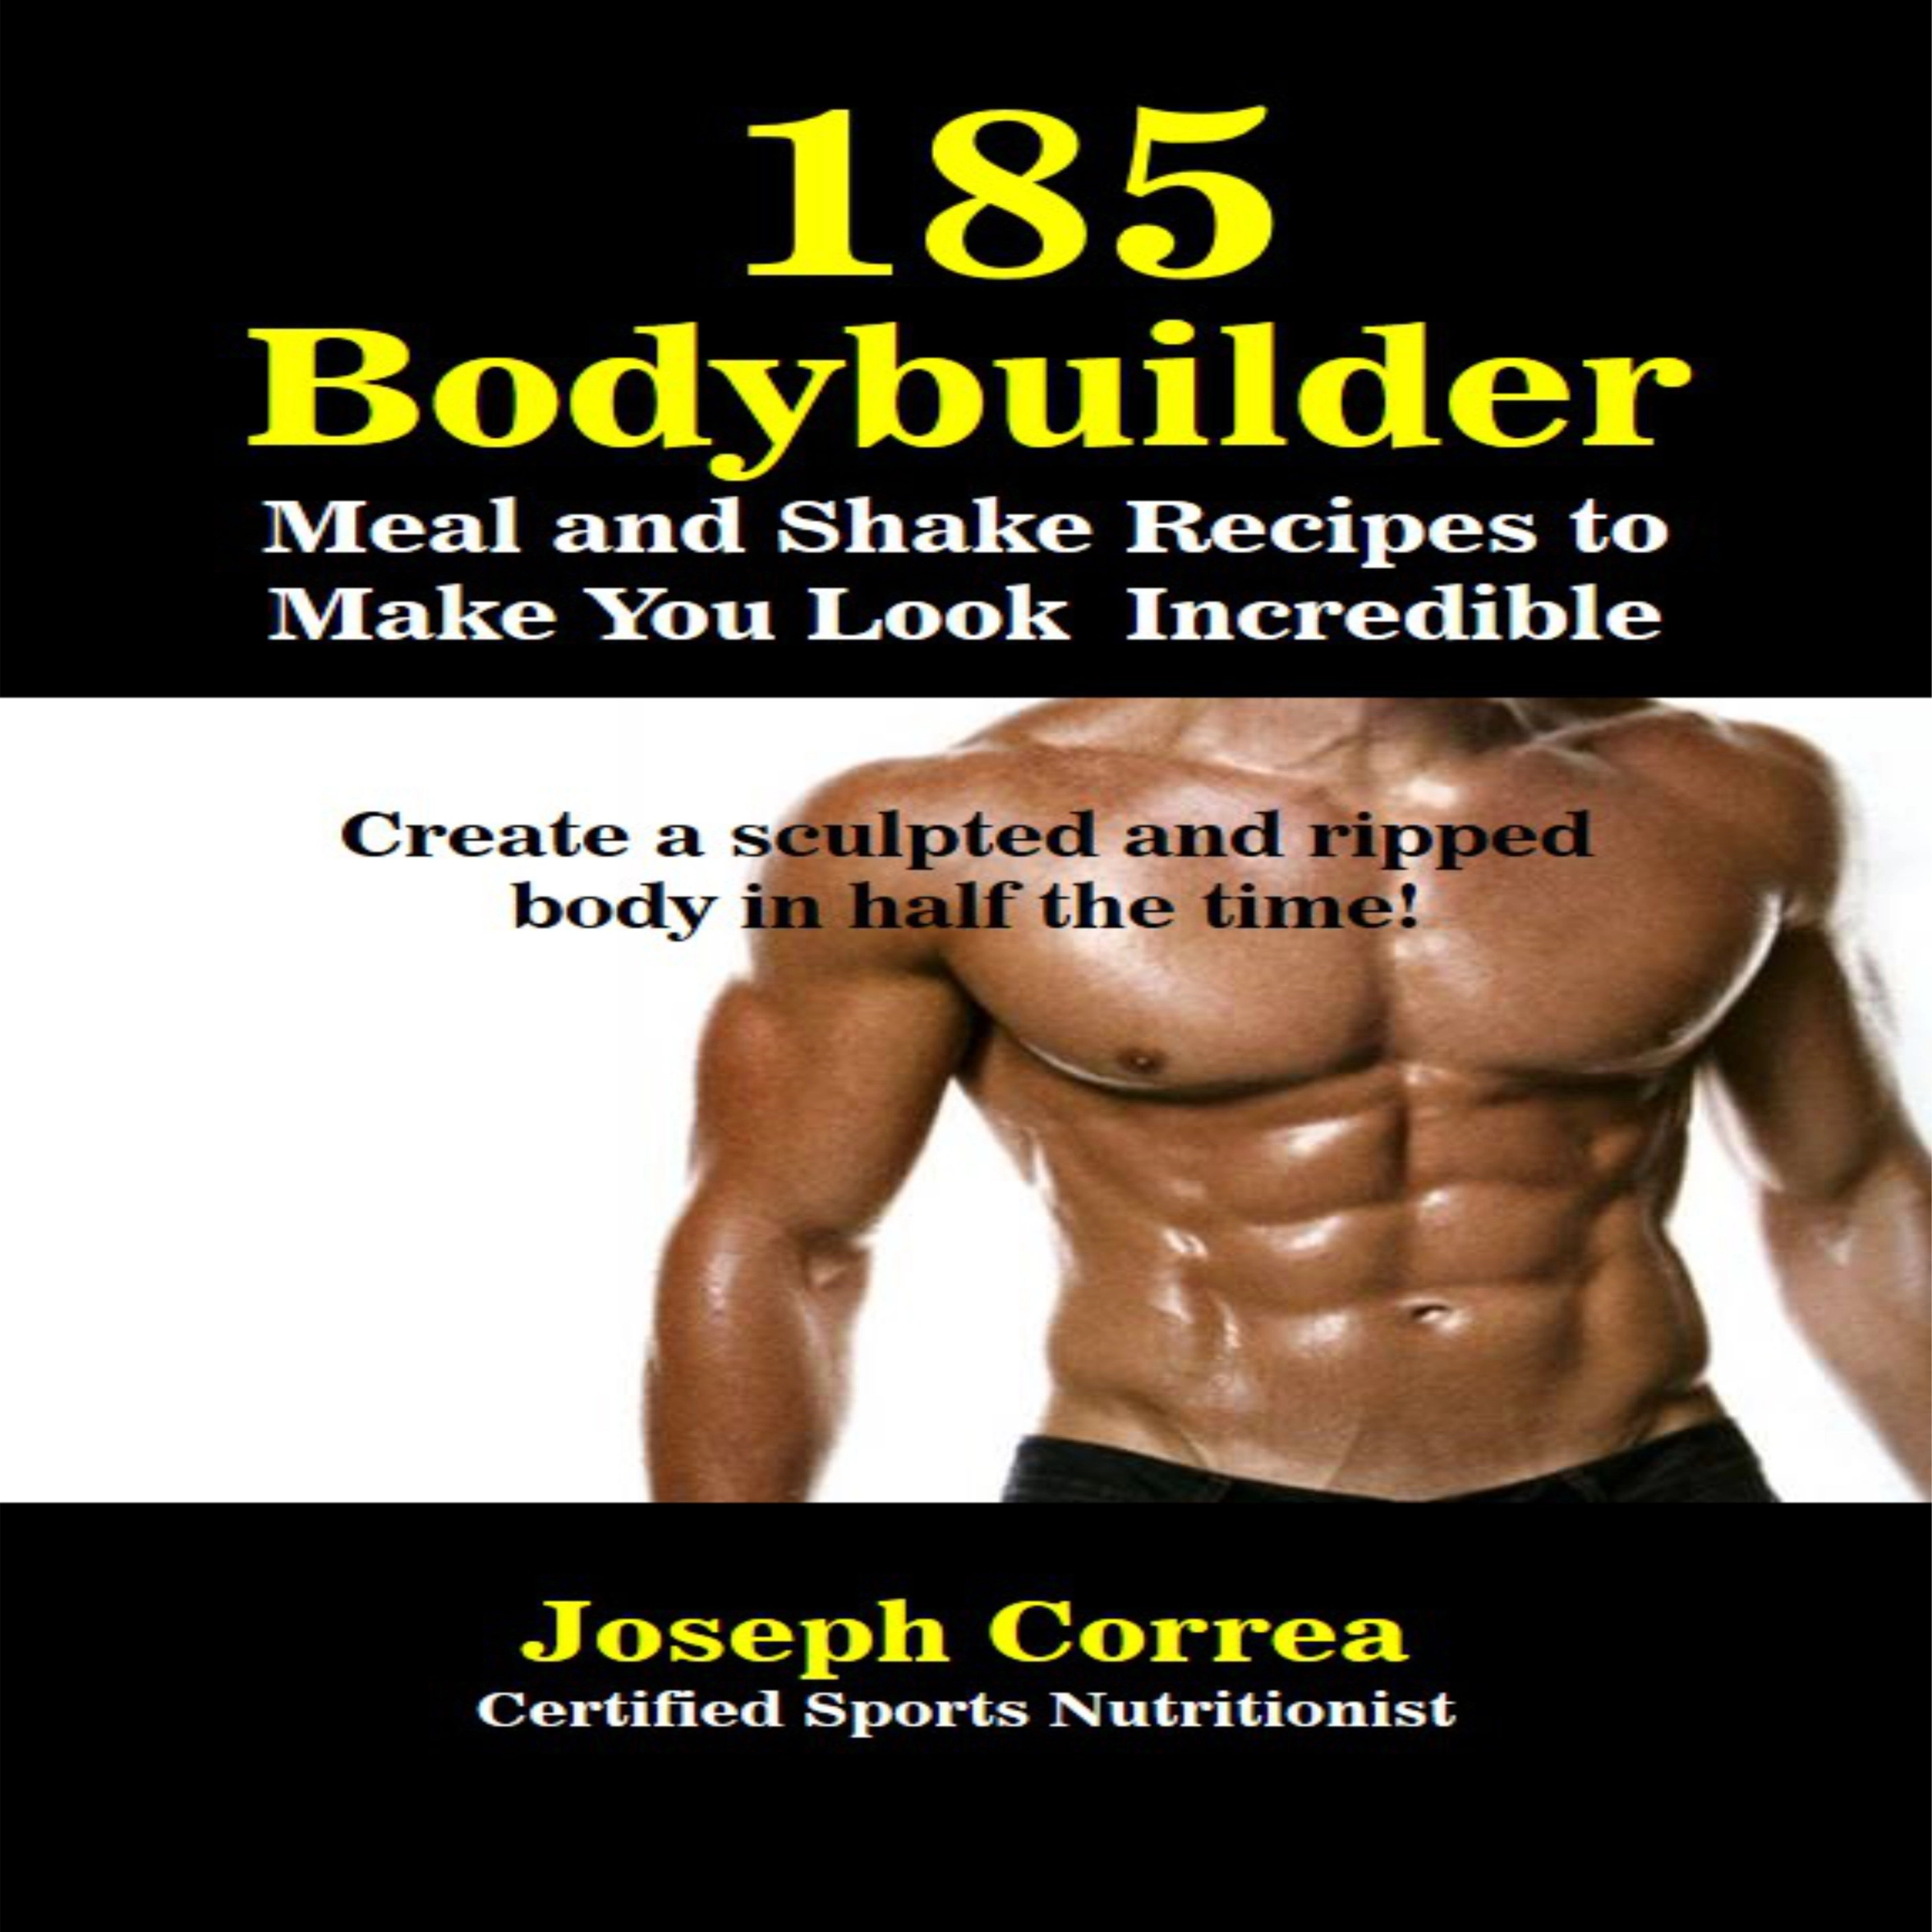 185 Bodybuilding Meal and Shake Recipes to Make You Look Incredible: Create a sculpted and ripped body in half the time! Audiobook by Joseph Correa